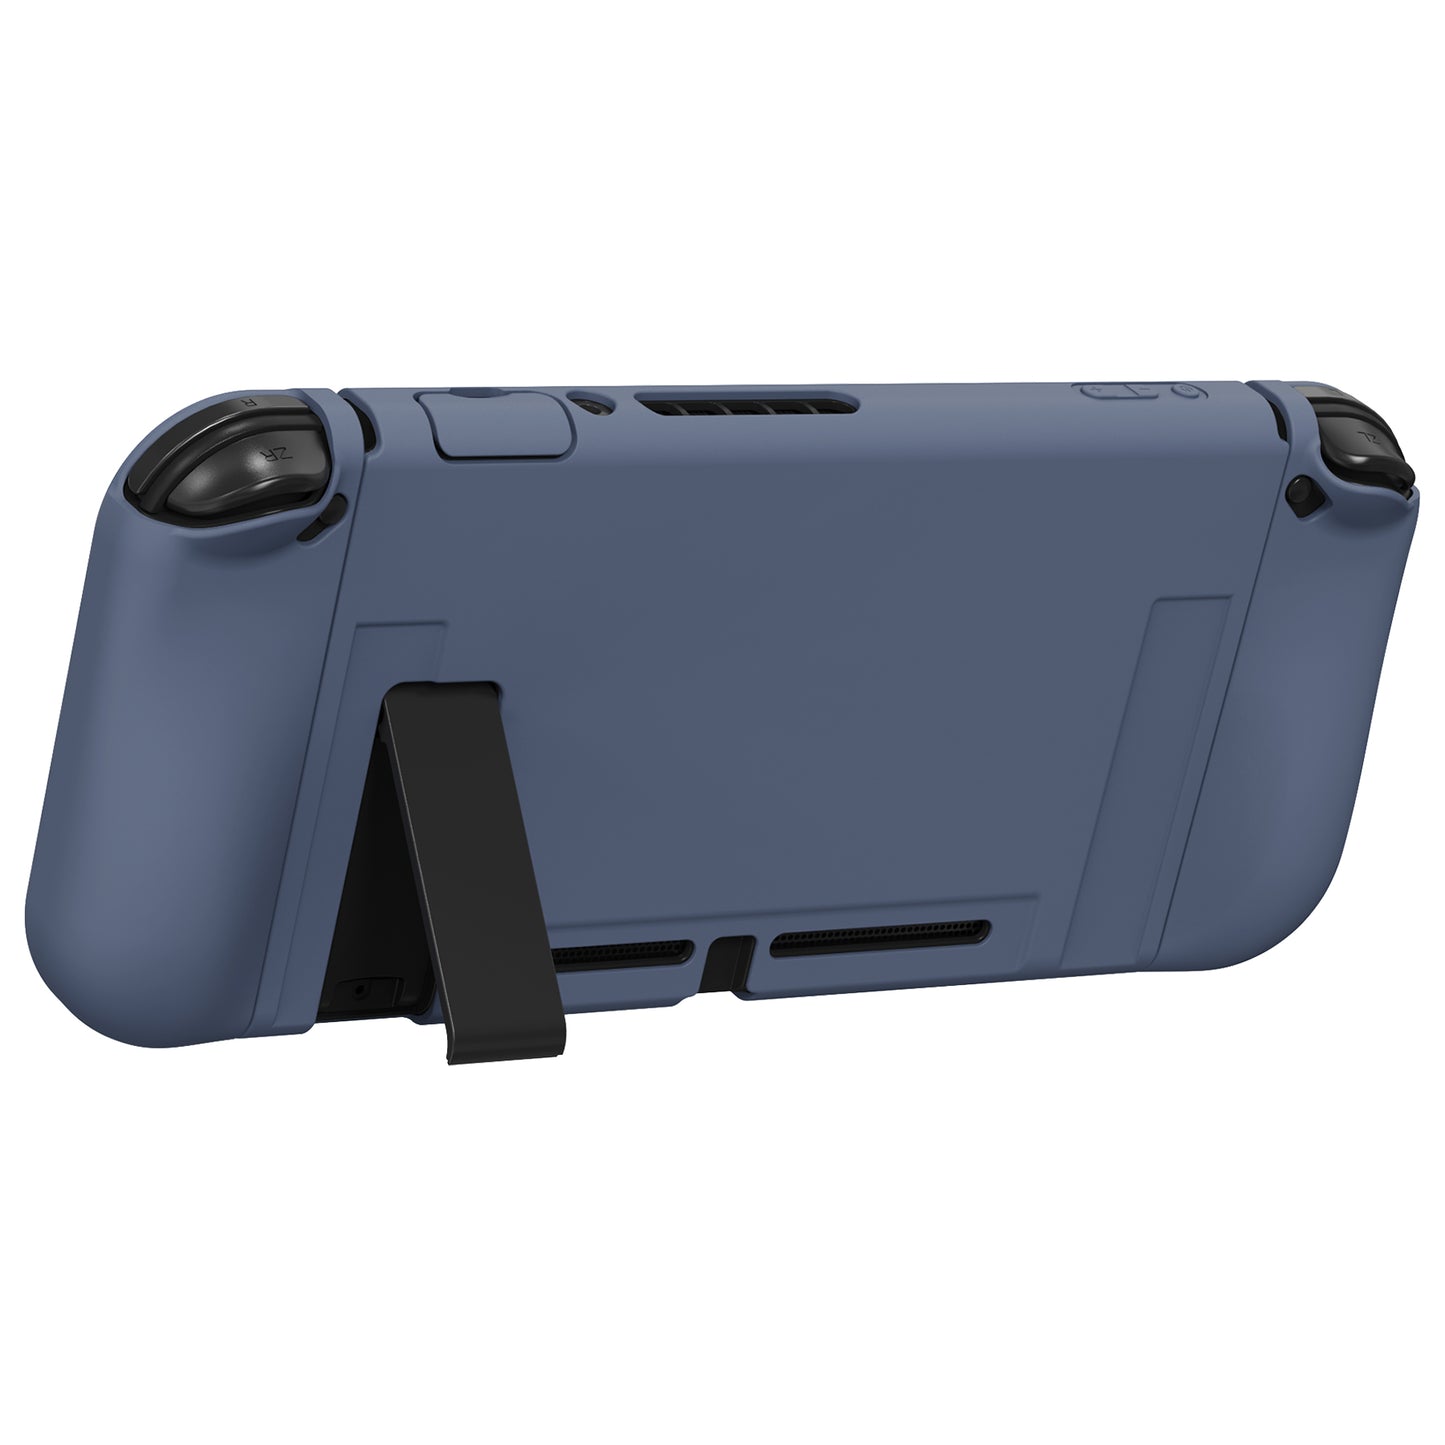 PlayVital ZealProtect Soft Protective Case for Nintendo Switch, Flexible Cover for Switch with Tempered Glass Screen Protector & Thumb Grips & ABXY Direction Button Caps - Slate Gray - RNSYM5011 playvital